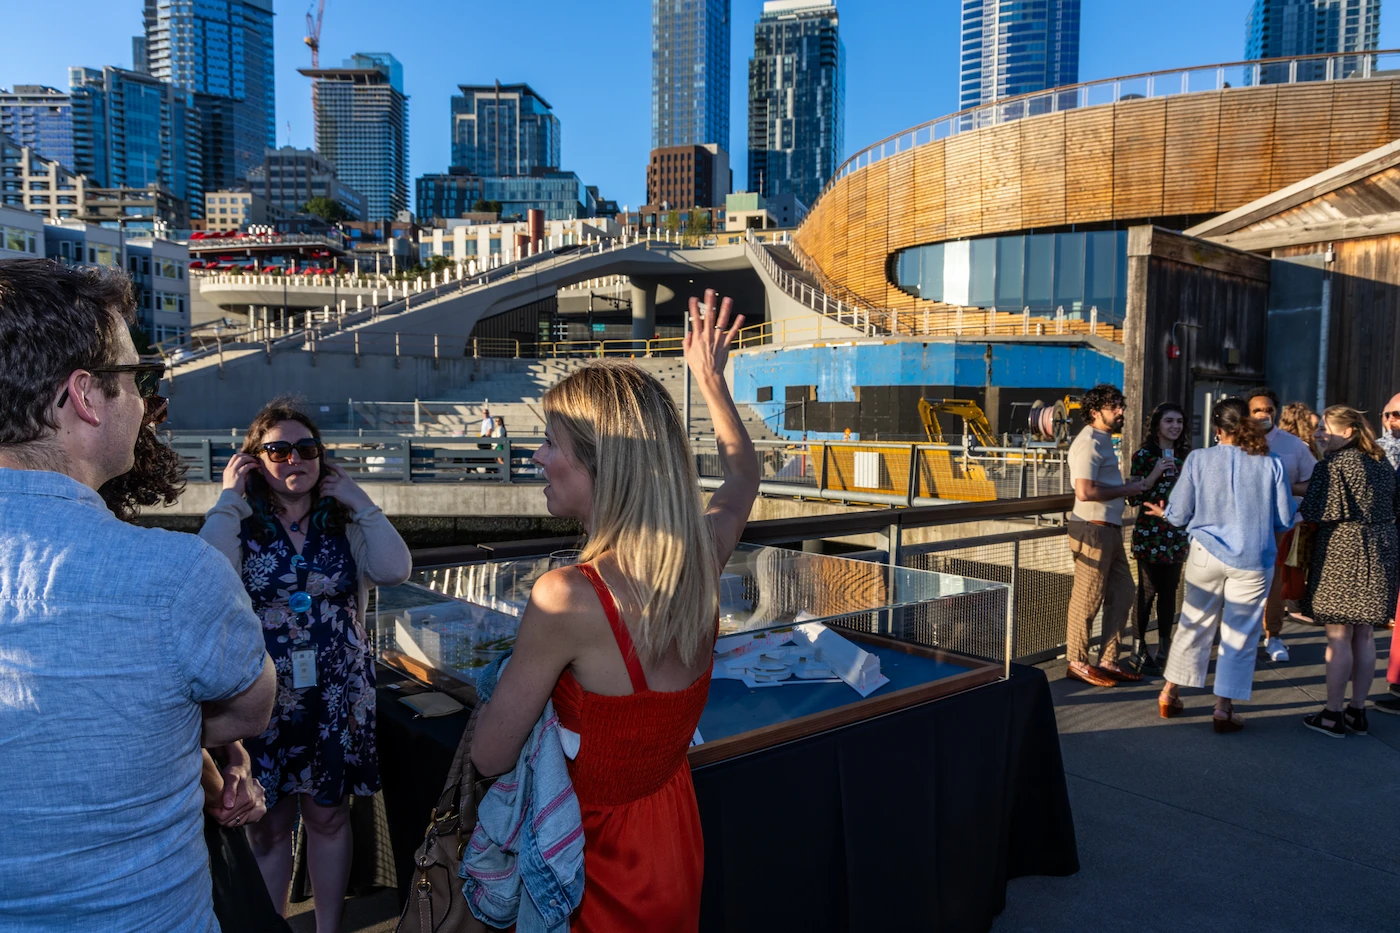 Guests at Splash in front of an architectural model of the Seattle Aquarium’s new Ocean Pavilion building, with the constructed Ocean Pavilion building in the background behind them being showcased to show how the building has become a reality.